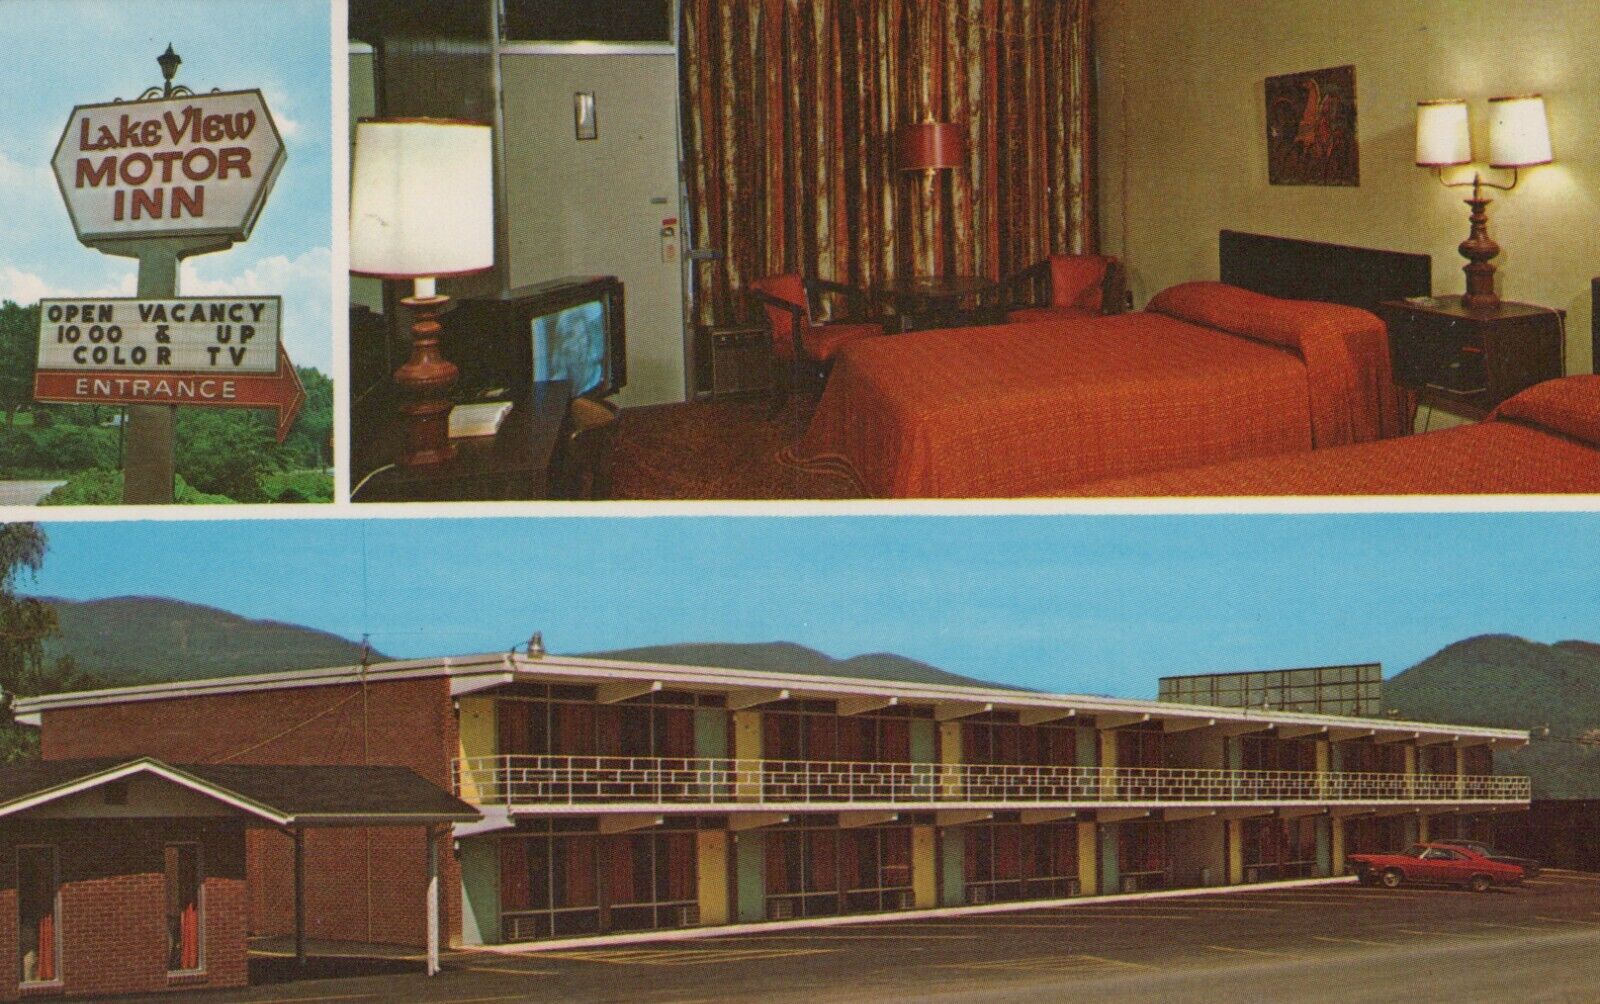 Historic Lake View Motor Inn by Caryville Tennessee Chrome Vintage Post Card